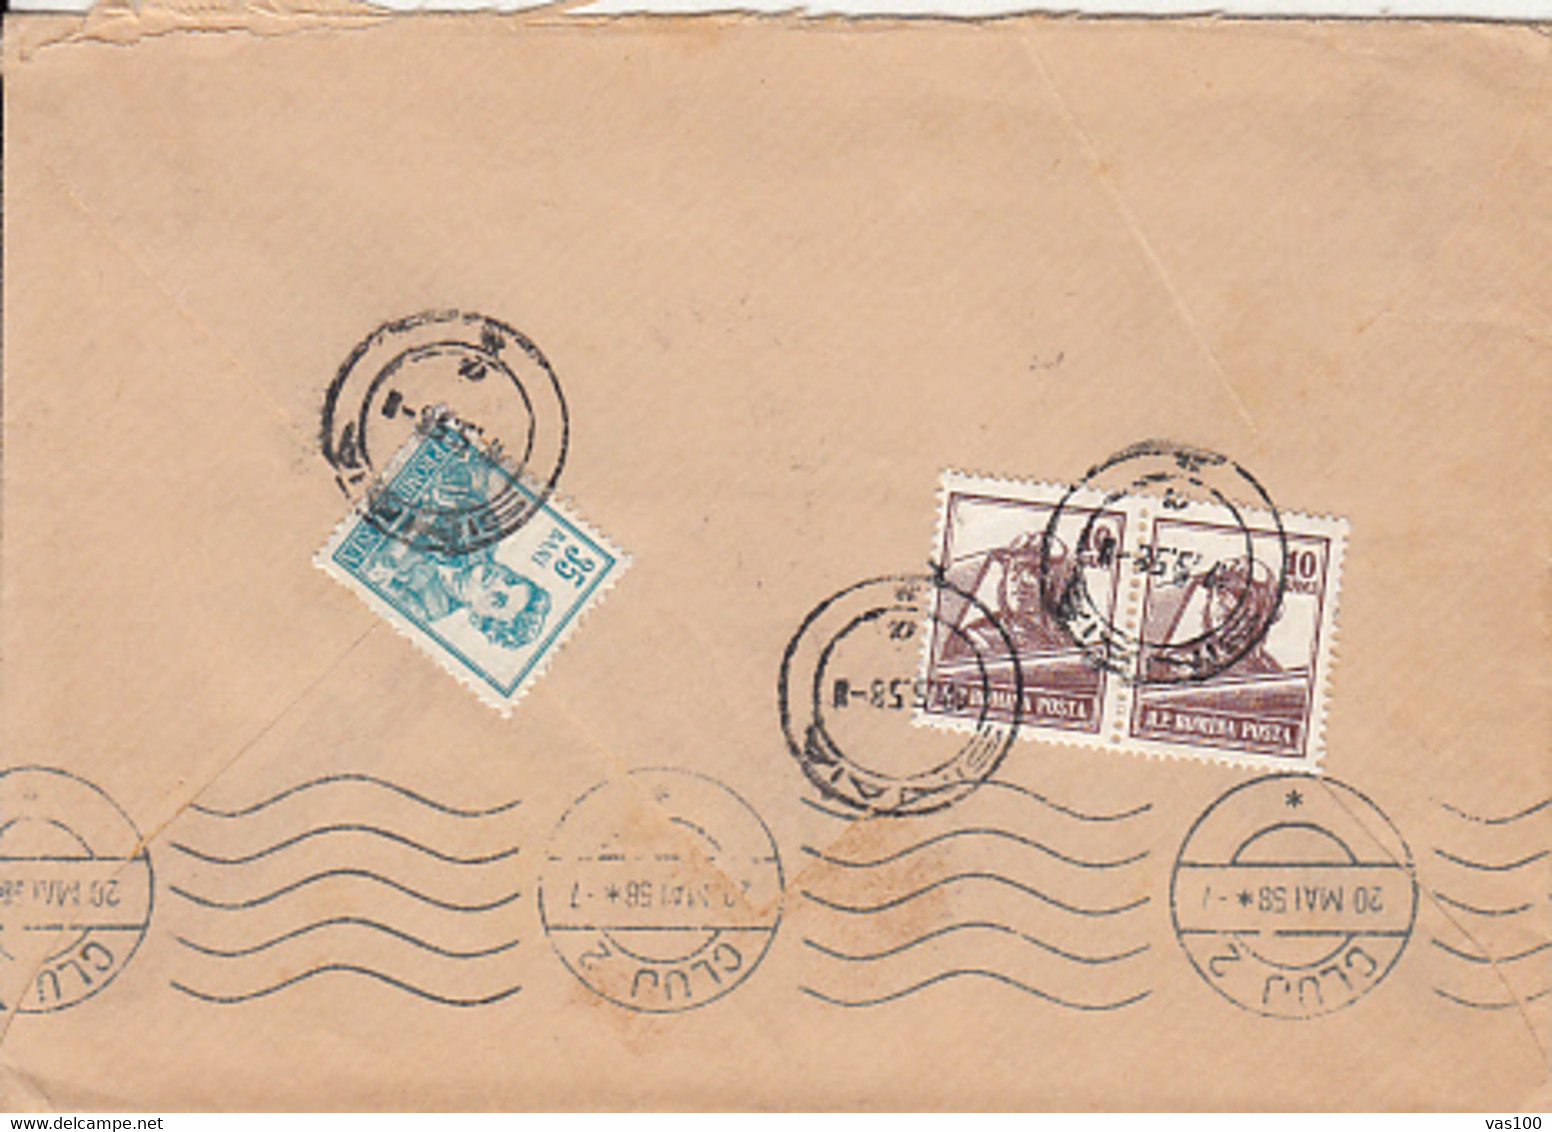 STUDENT, PILOT STAMPS, WAVY LINES CANCELLATIONS ON COVER, 1958, ROMANIA - Covers & Documents